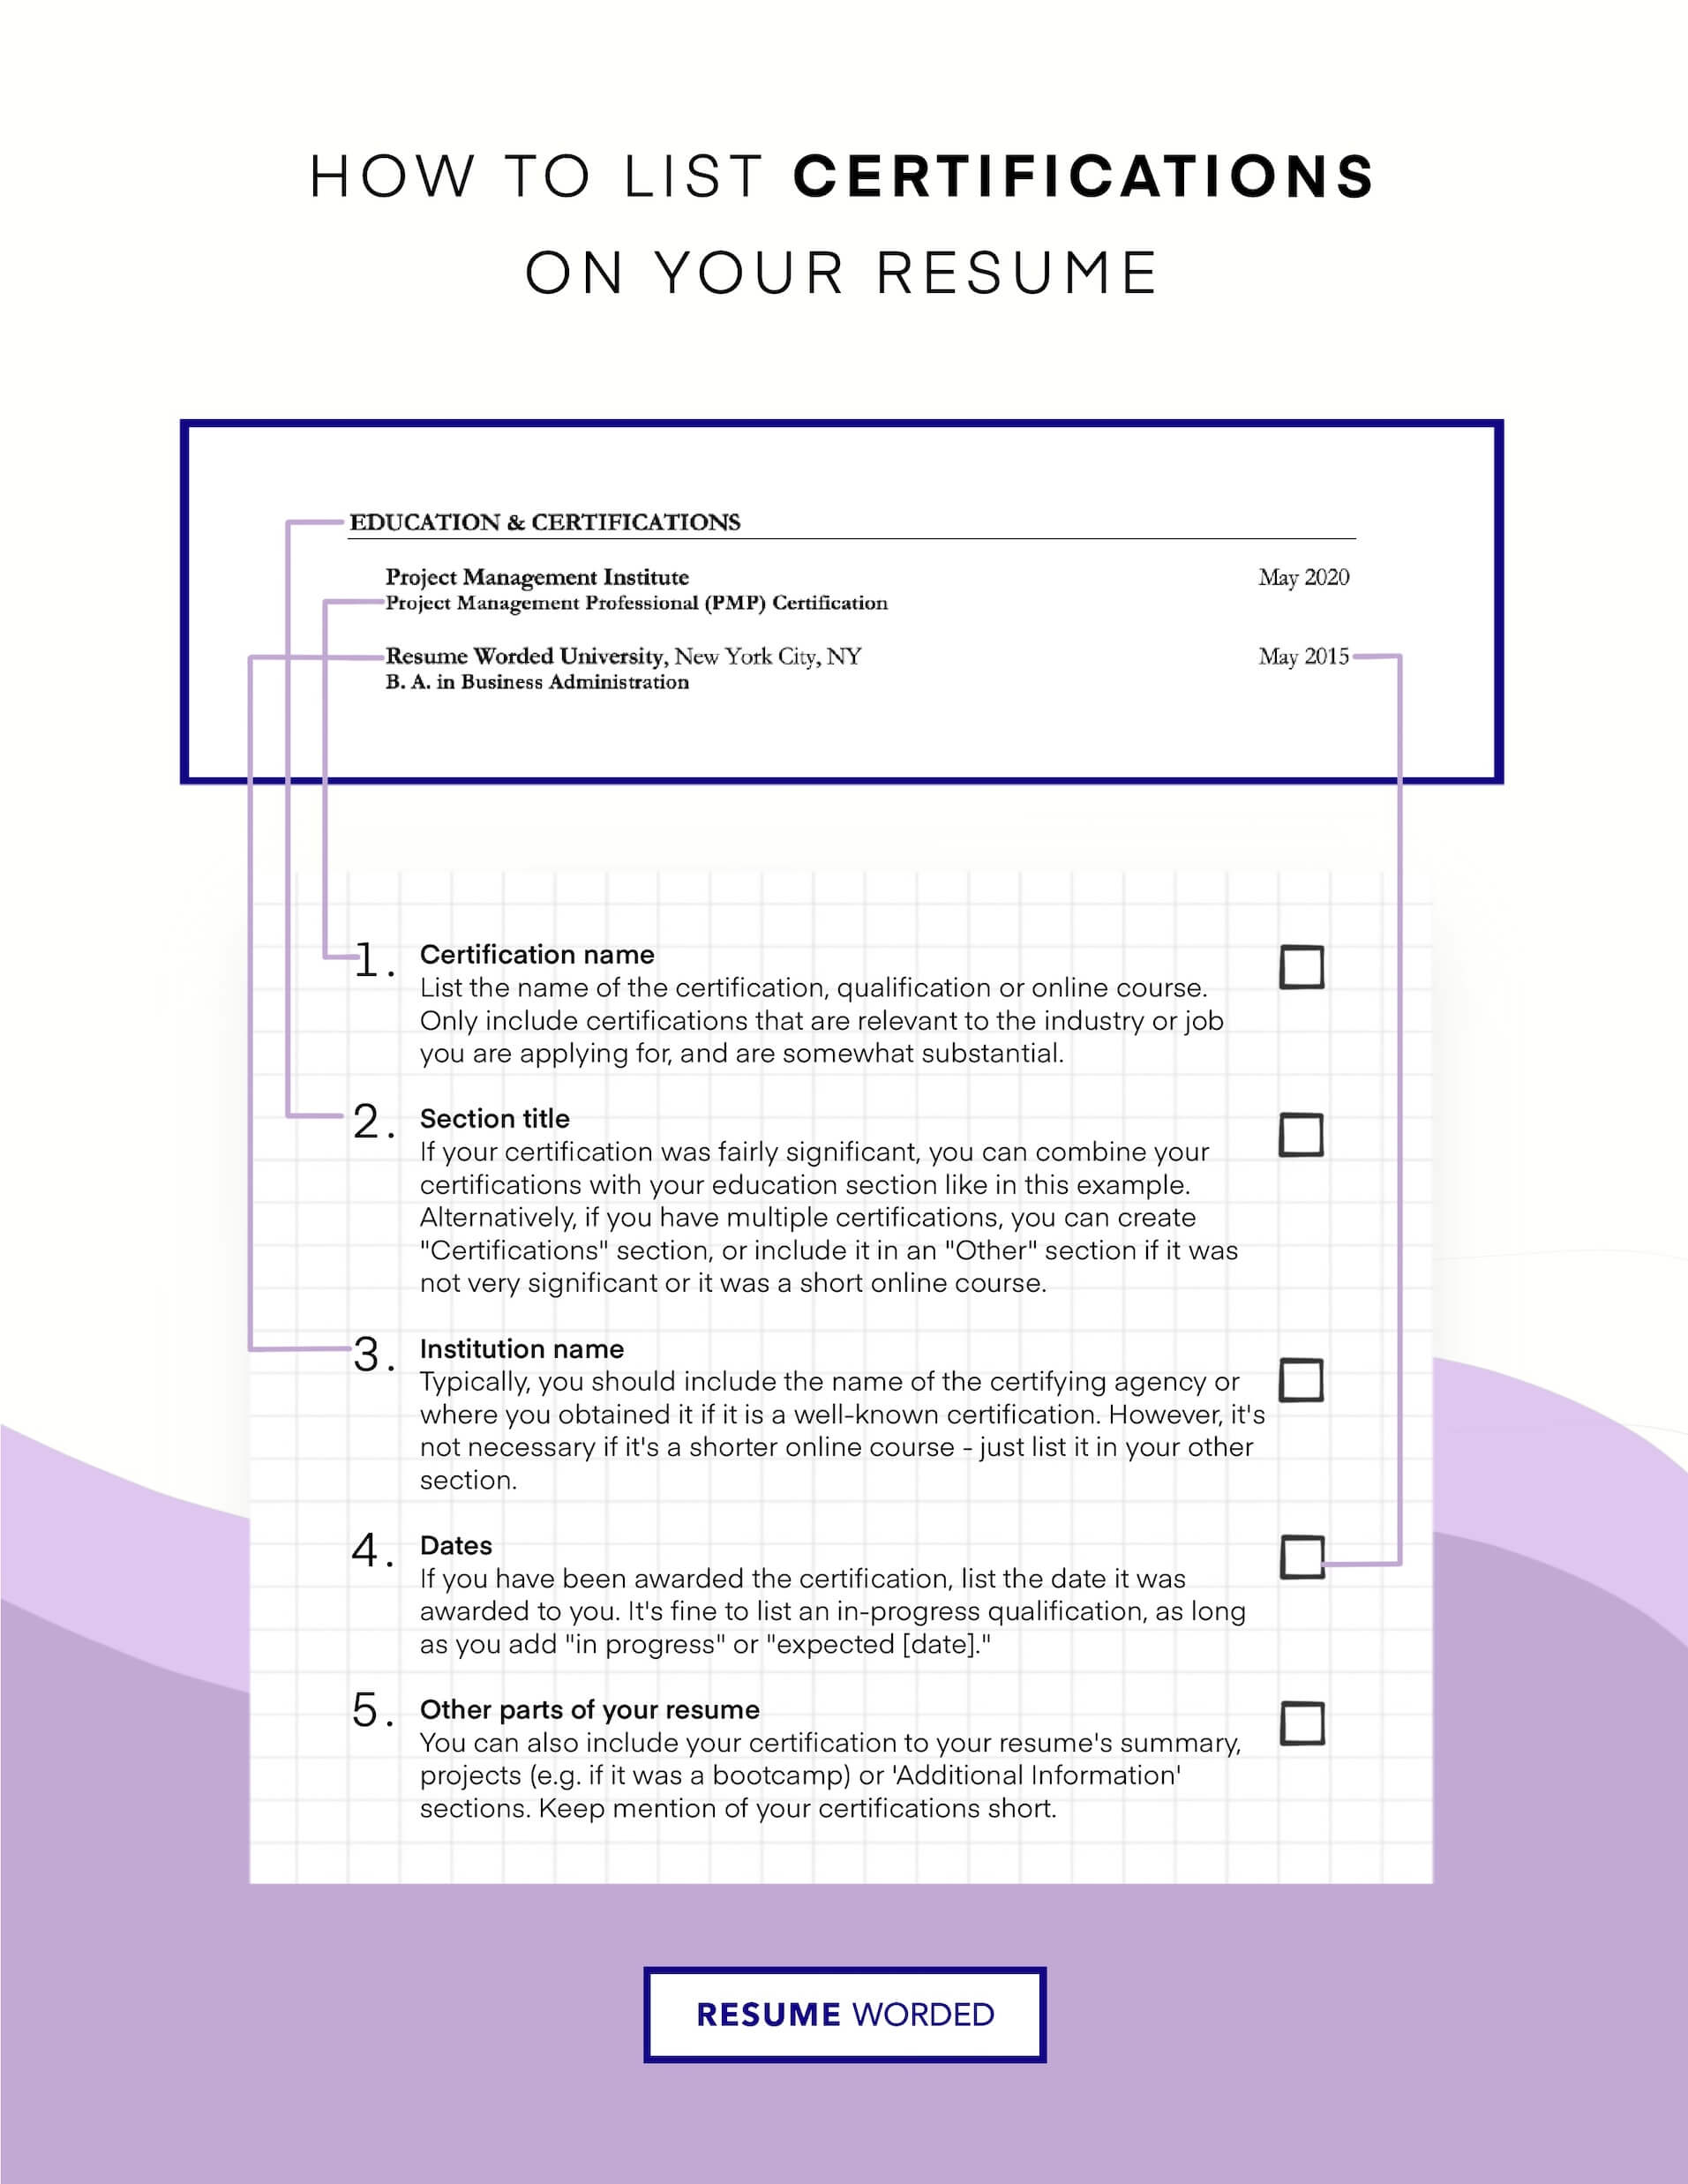 Ensure you are properly qualified and pursue extra qualifications. - Correctional Officer Resume